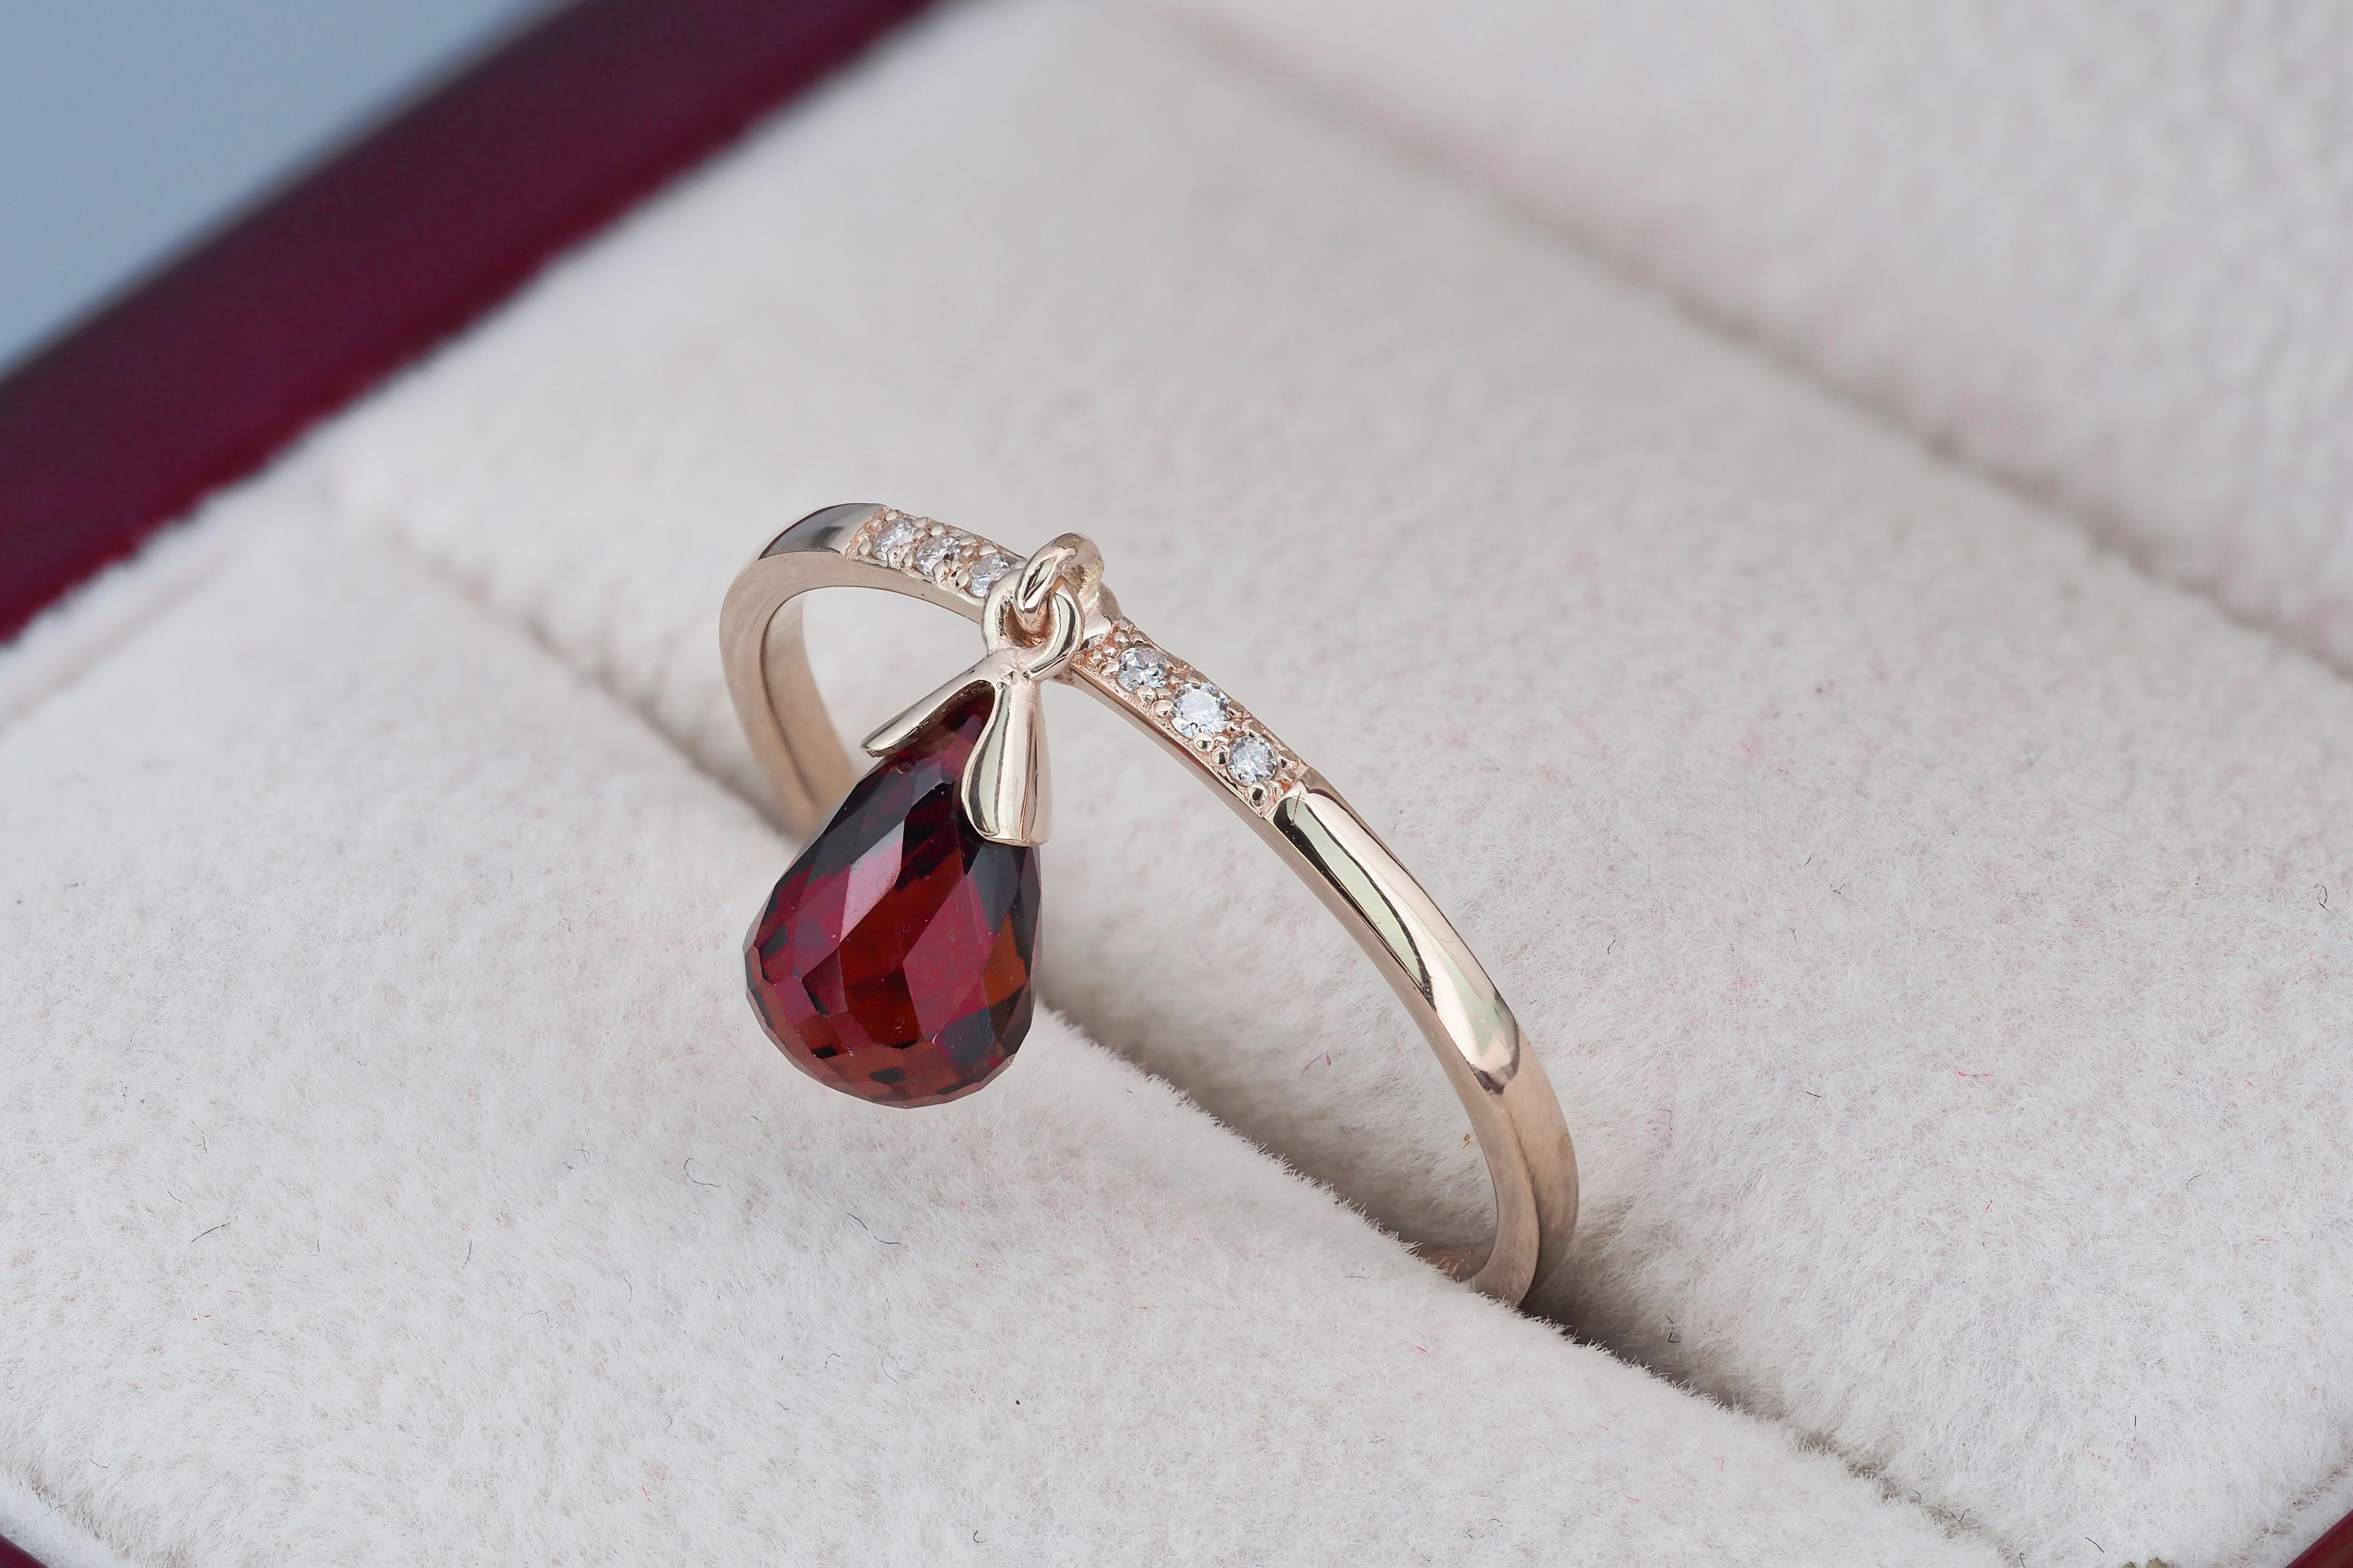 For Sale:  14k Gold Ring with Briolette Cut Garnet and Diamonds 8